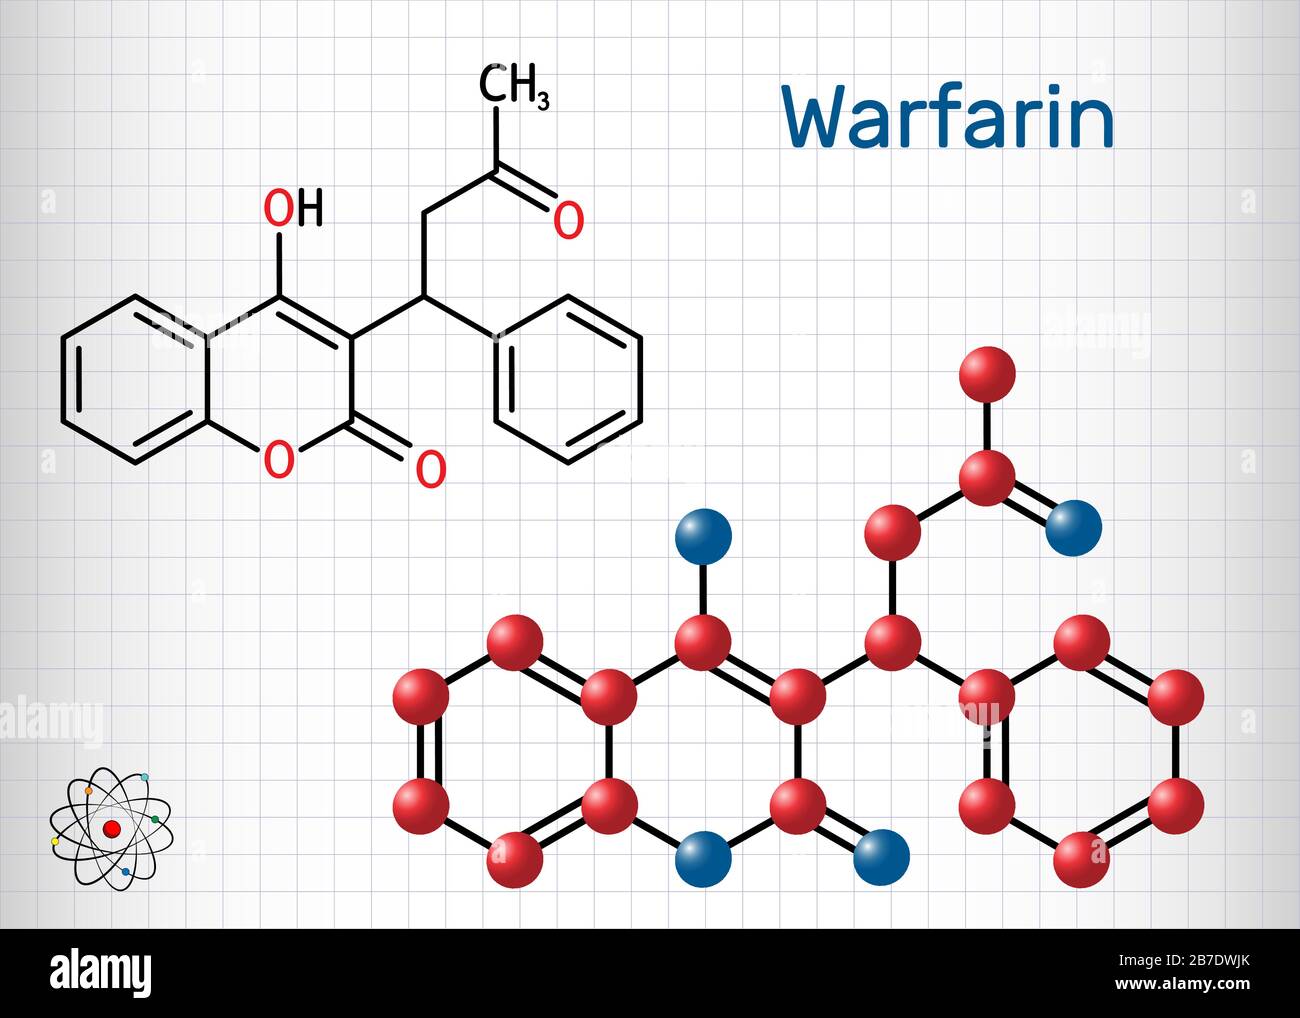 Warfarin, C19H16O4 molecule. Warfarin is an anticoagulant drug normally used to prevent blood clot formation. Sheet of paper in a cage. Vector illustr Stock Vector